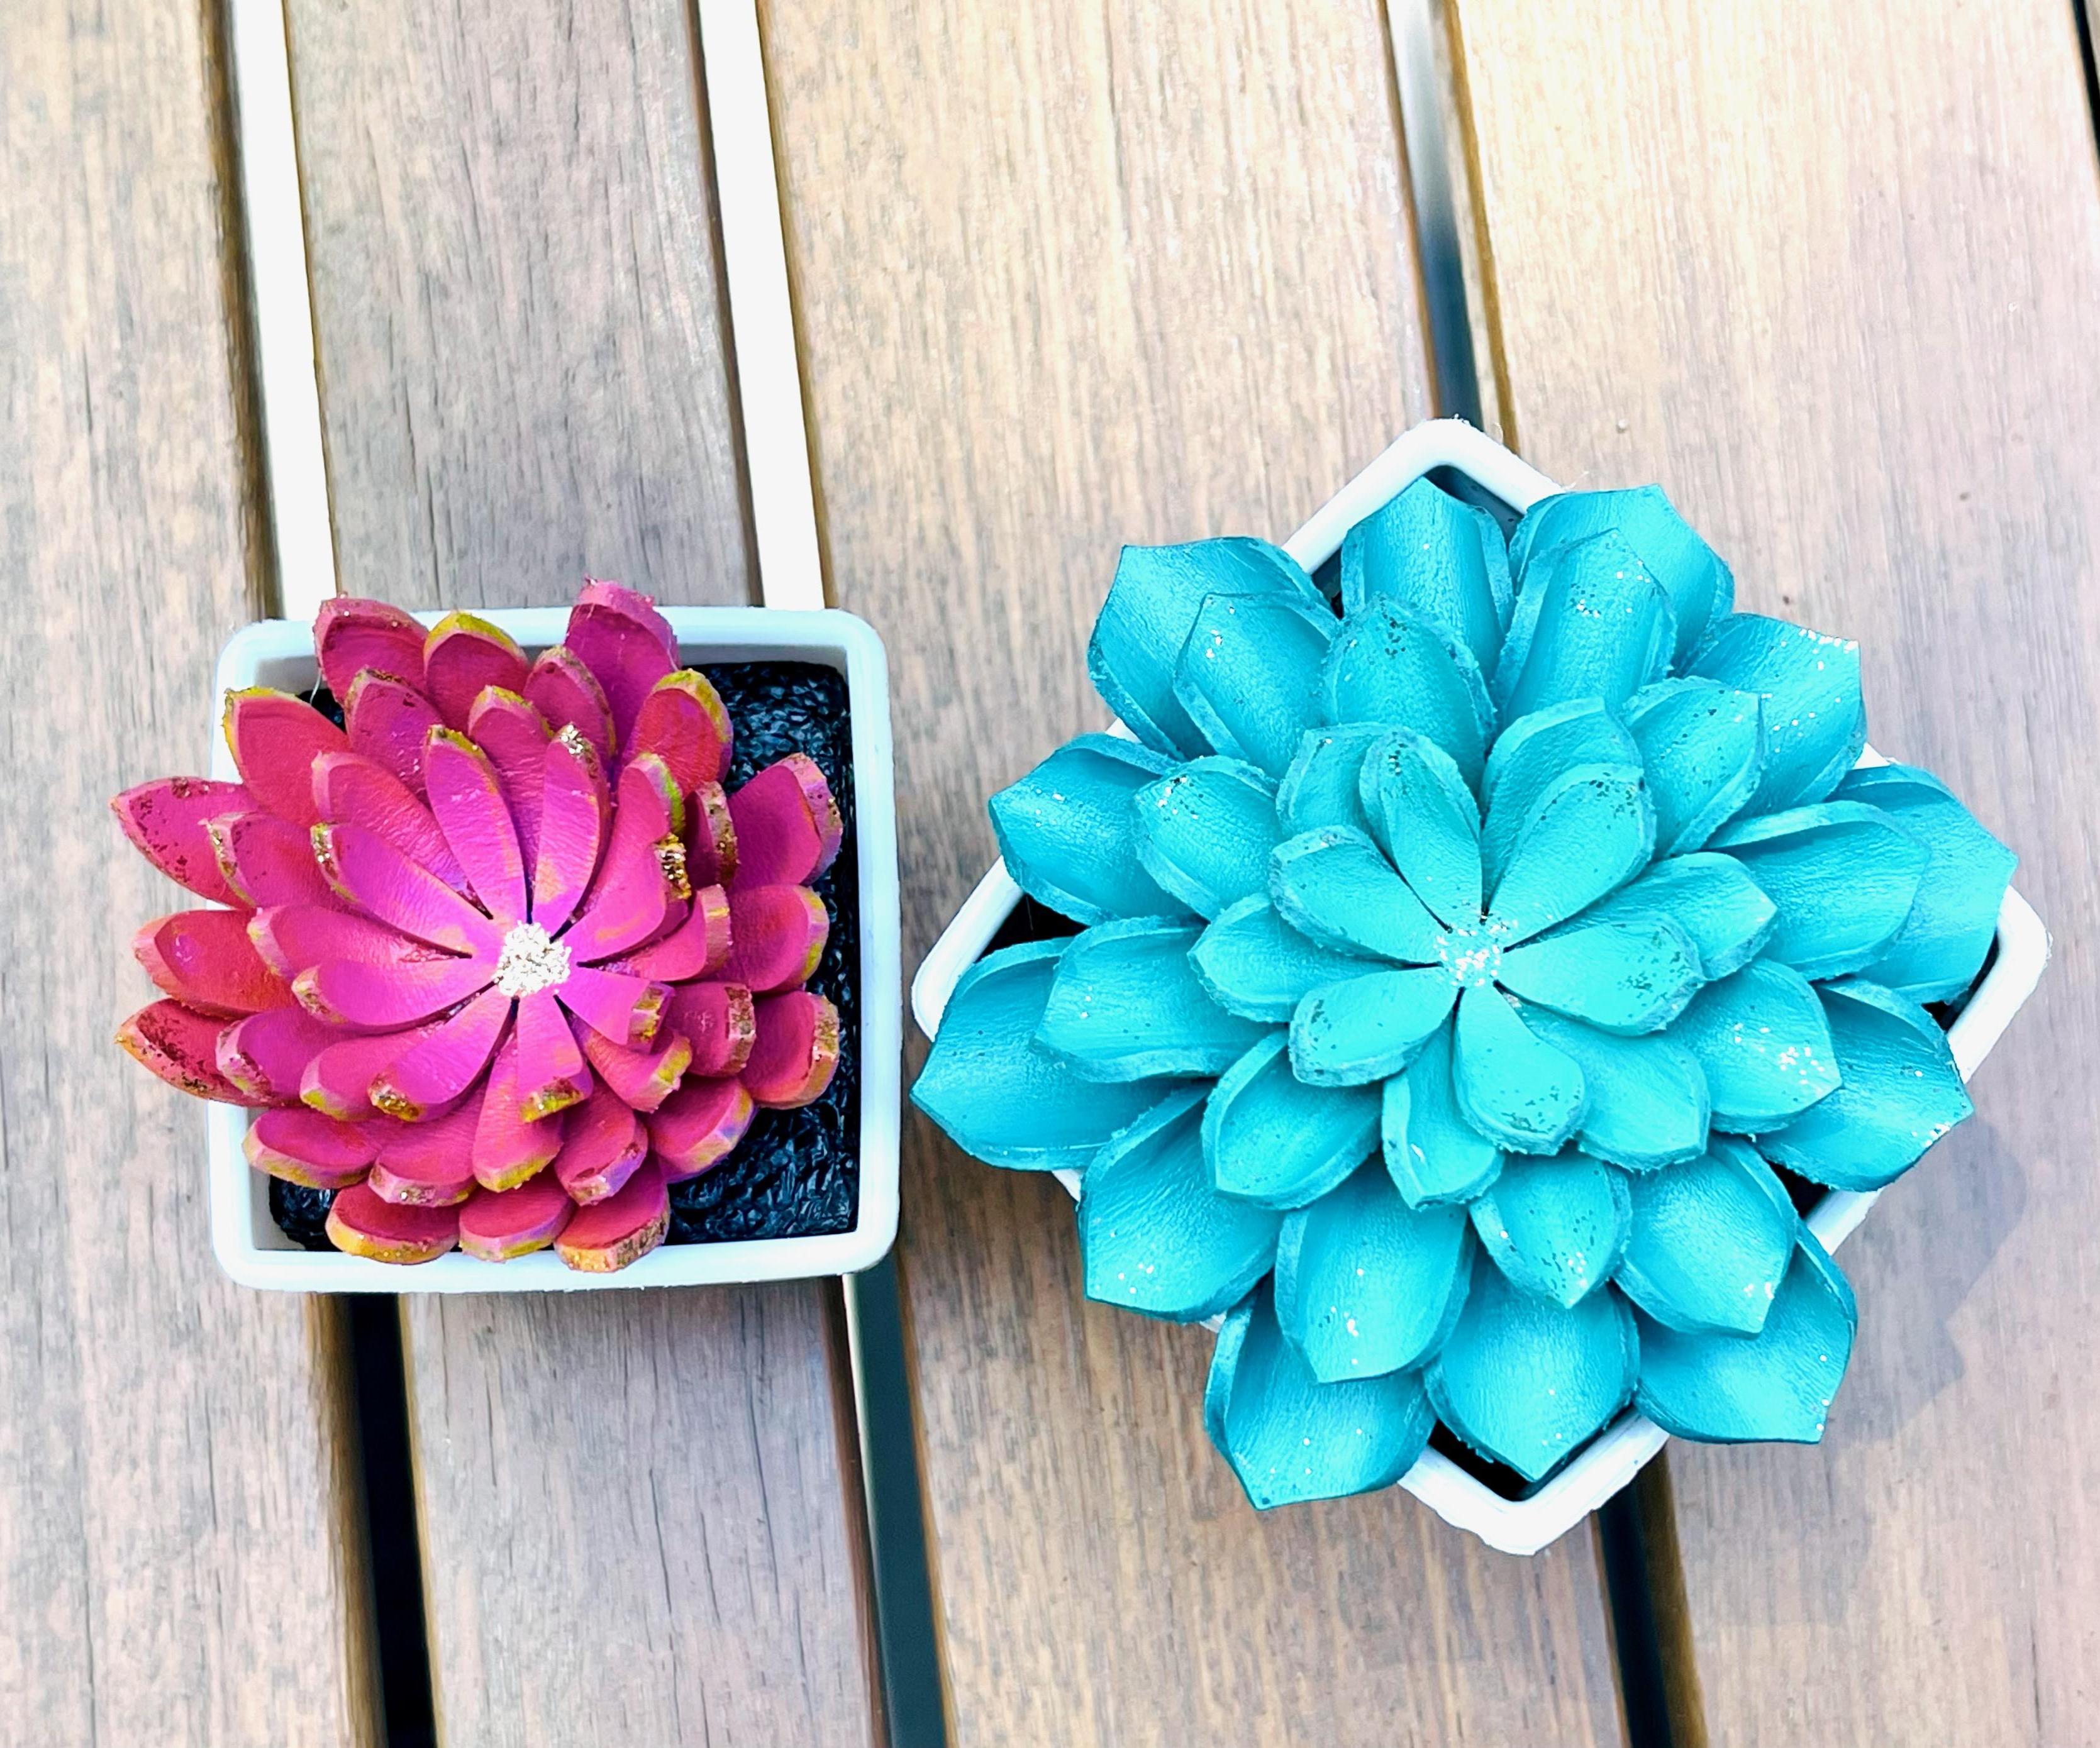 How to Make Leather Succulents